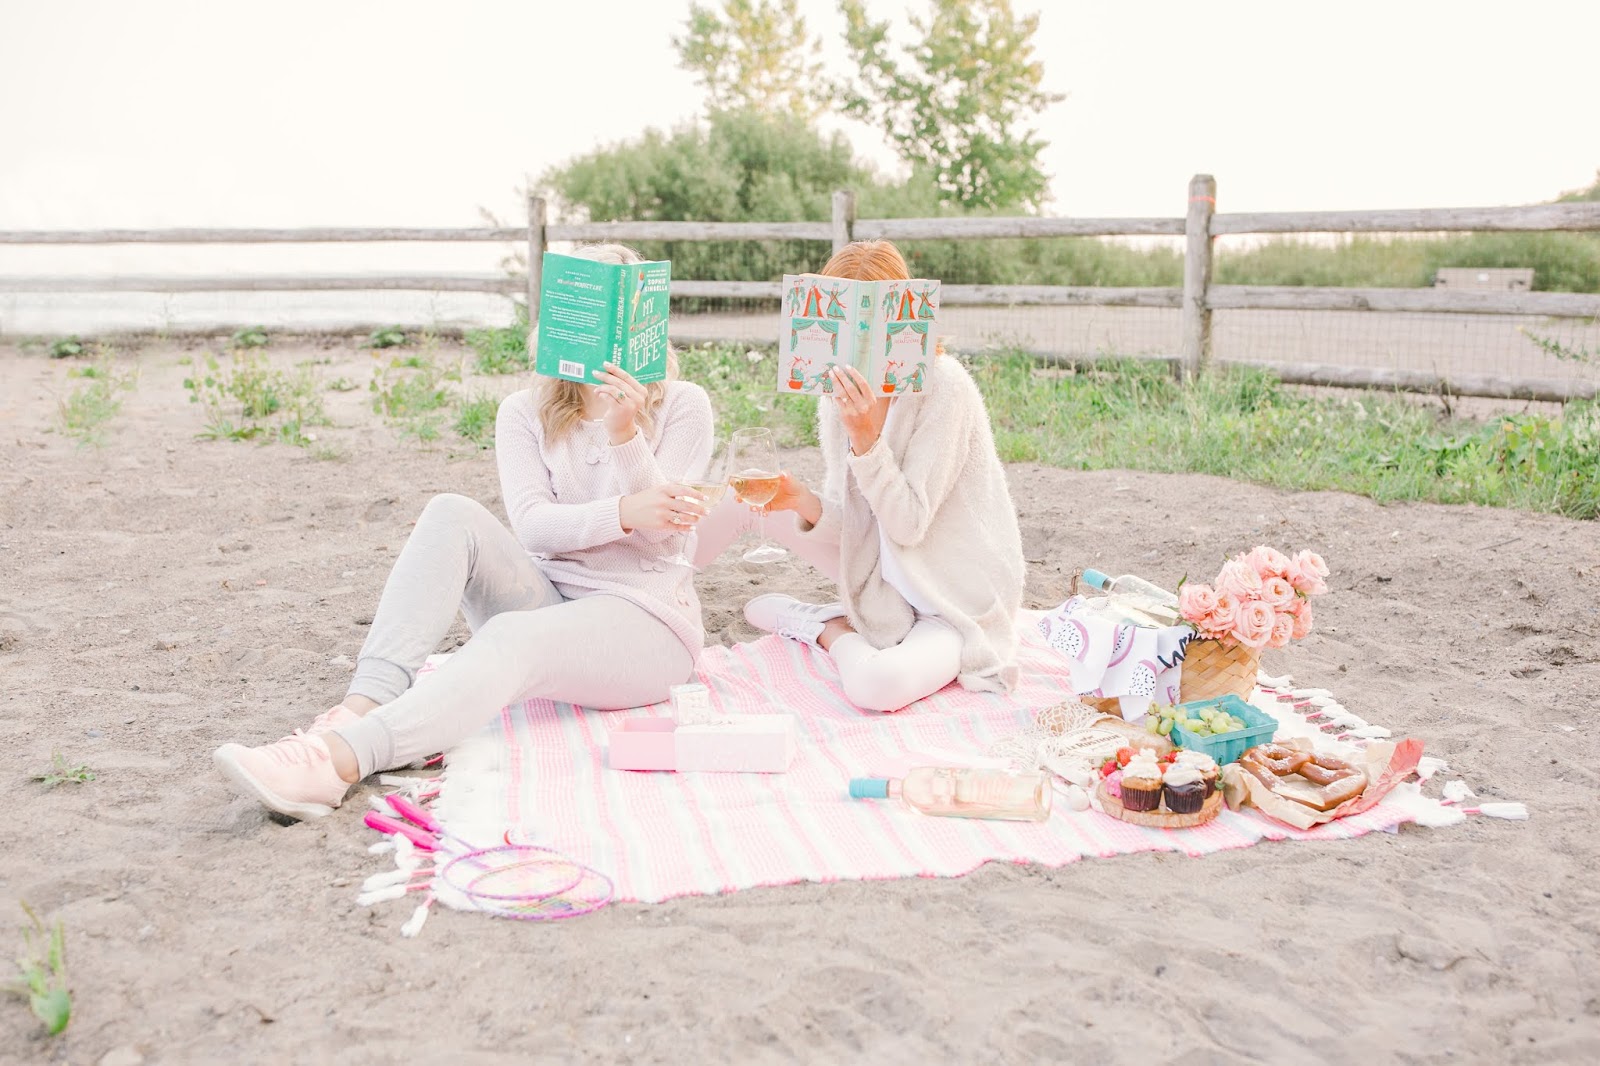 How to Have the Perfect Self-Care Day with XOXO Wines - Colourful, pink beach picnic with bestie